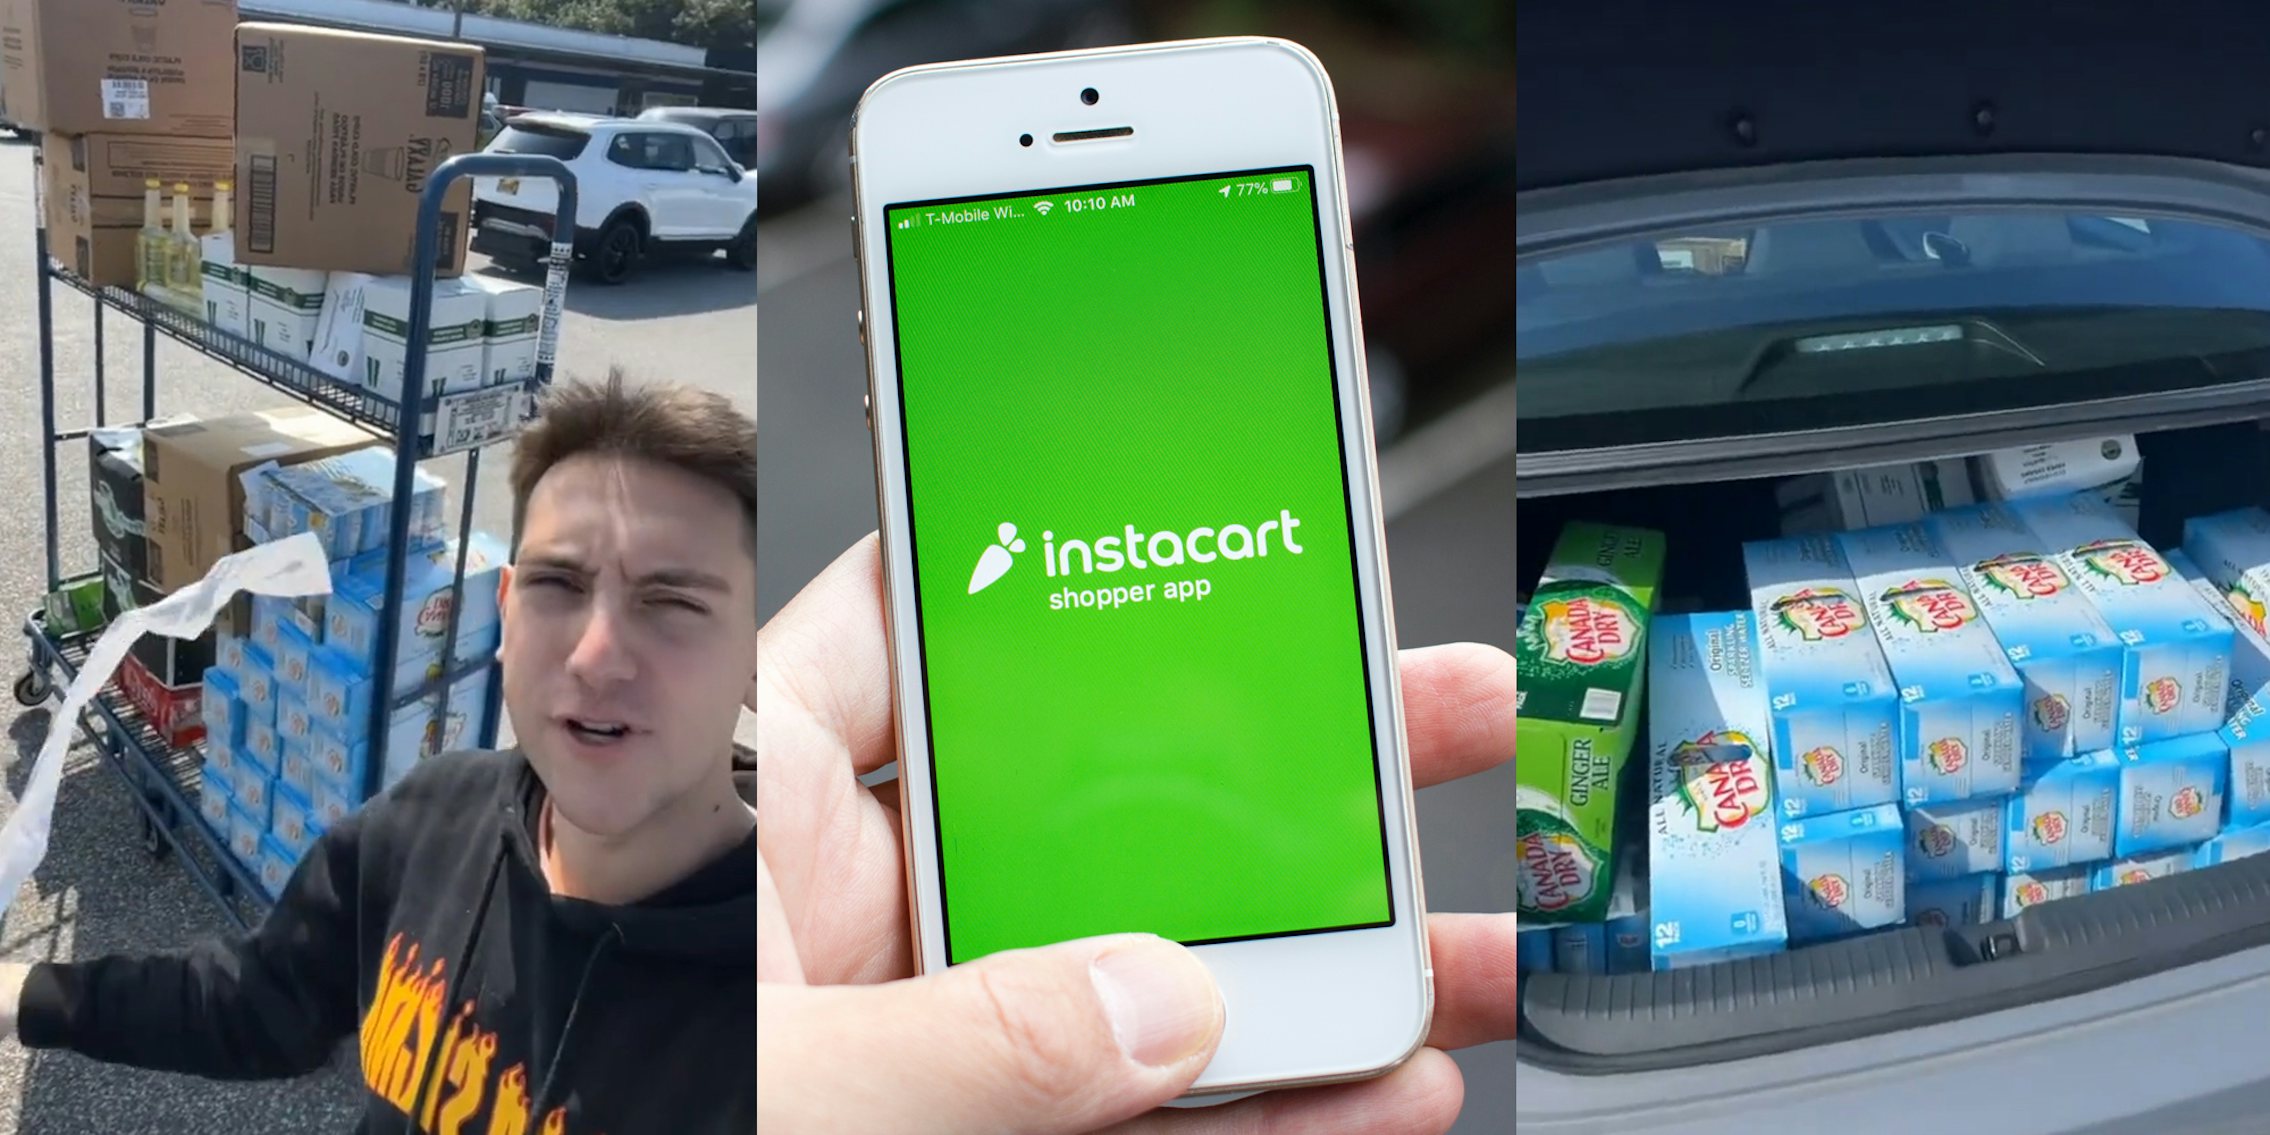 Instacart shopper with rolling rack of items in parking lot (l) hand holding phone with Instacart Shopper App on screen (c) trunk of car full of cases of Canada Dry (r)